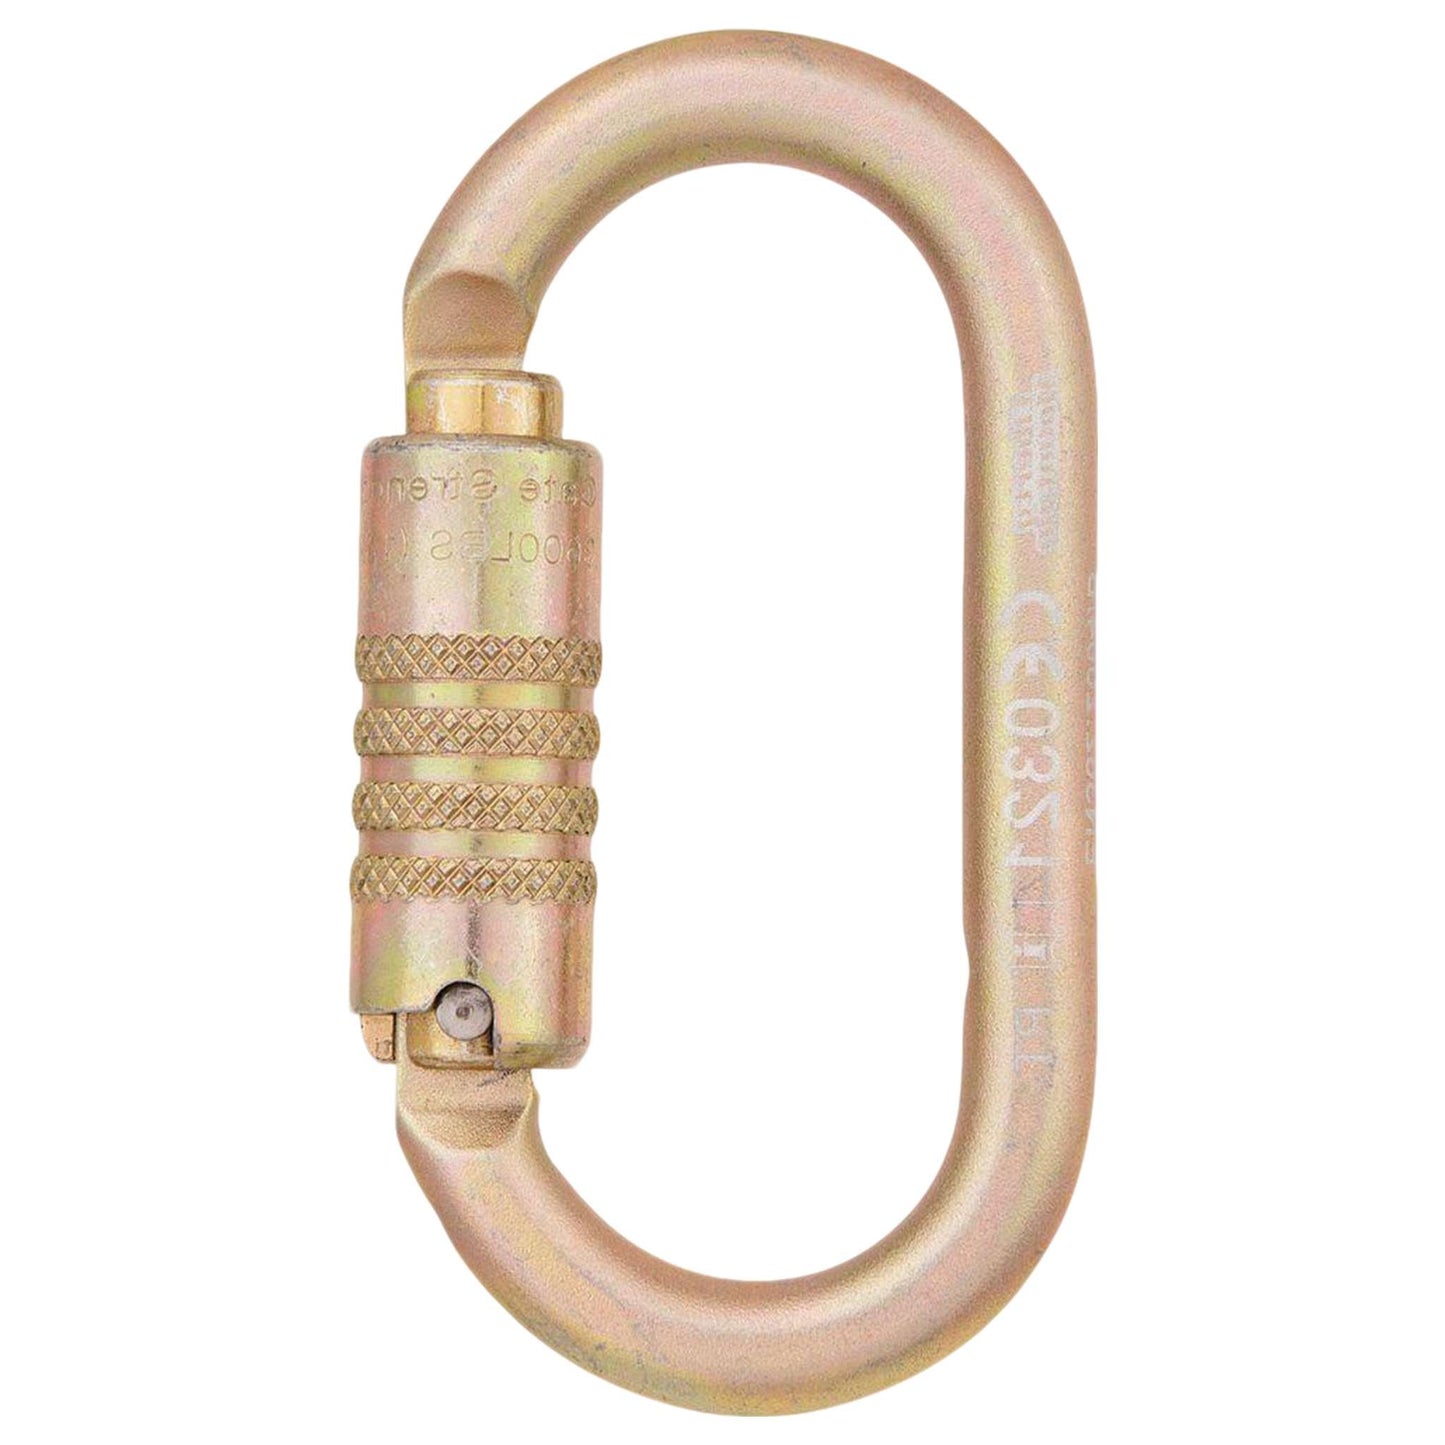 Cypher G Series Oval Carabiner - Triple Lock, ANSI Certified, Yellow Zinc Plated